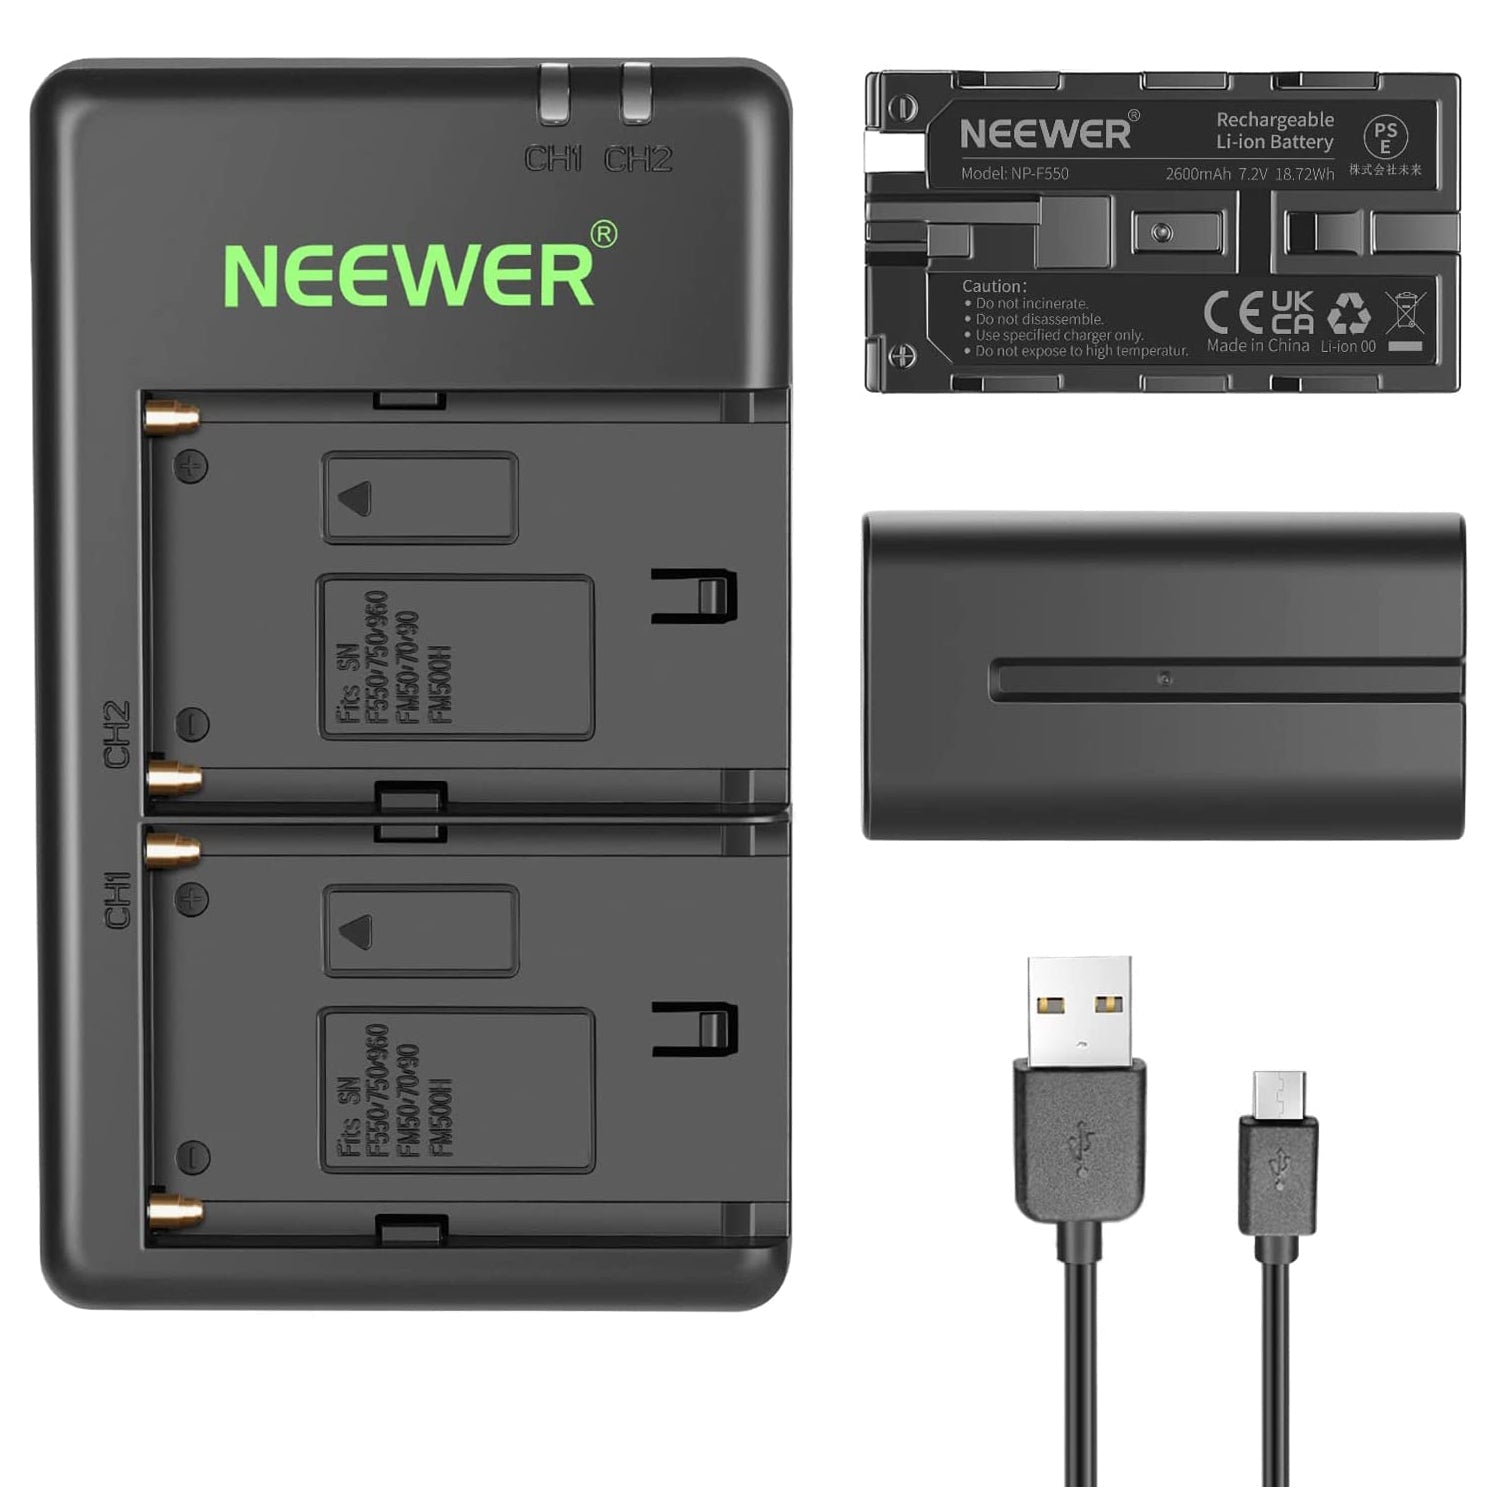 NEEWER NP-F550 Battery Charger Set for Sony